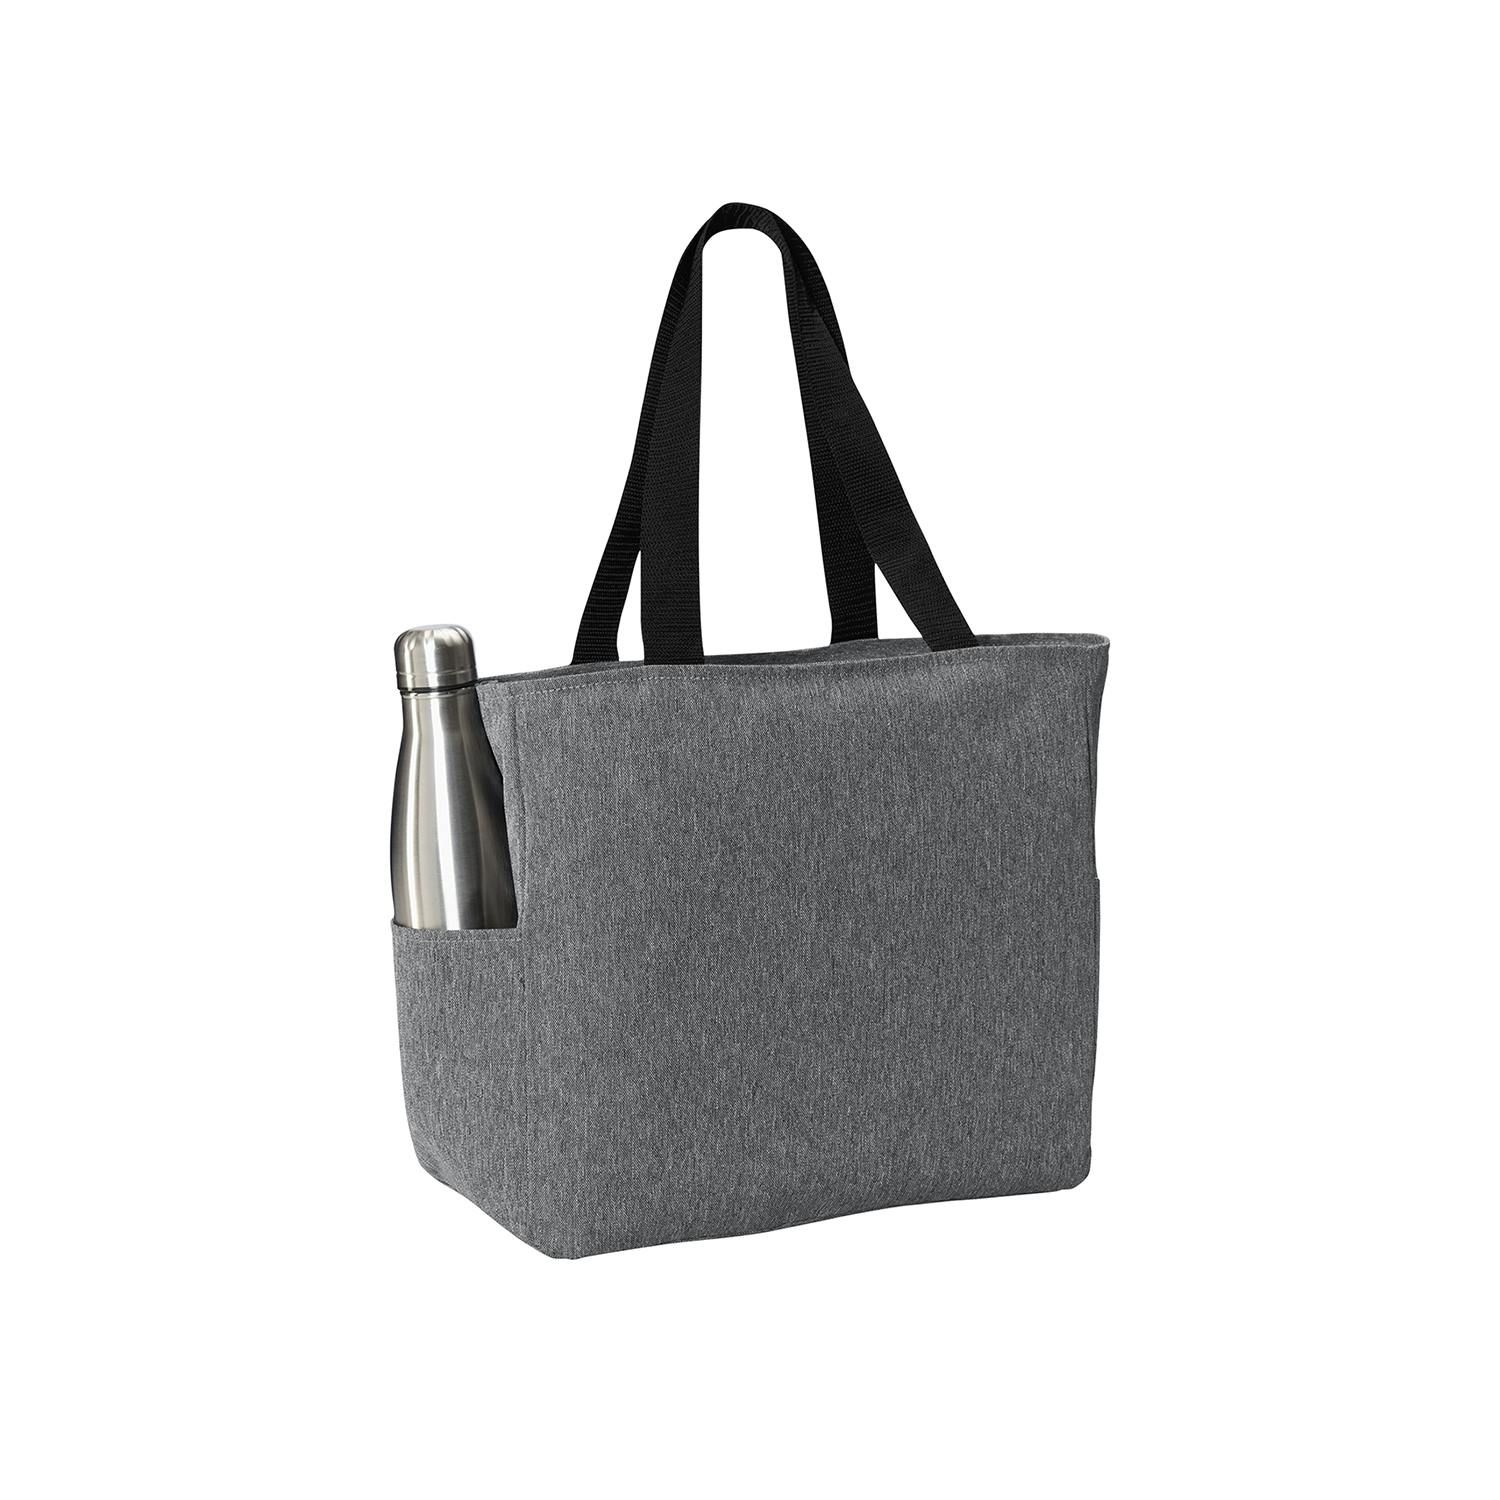 Port Authority Zip Tote Bag - additional Image 2